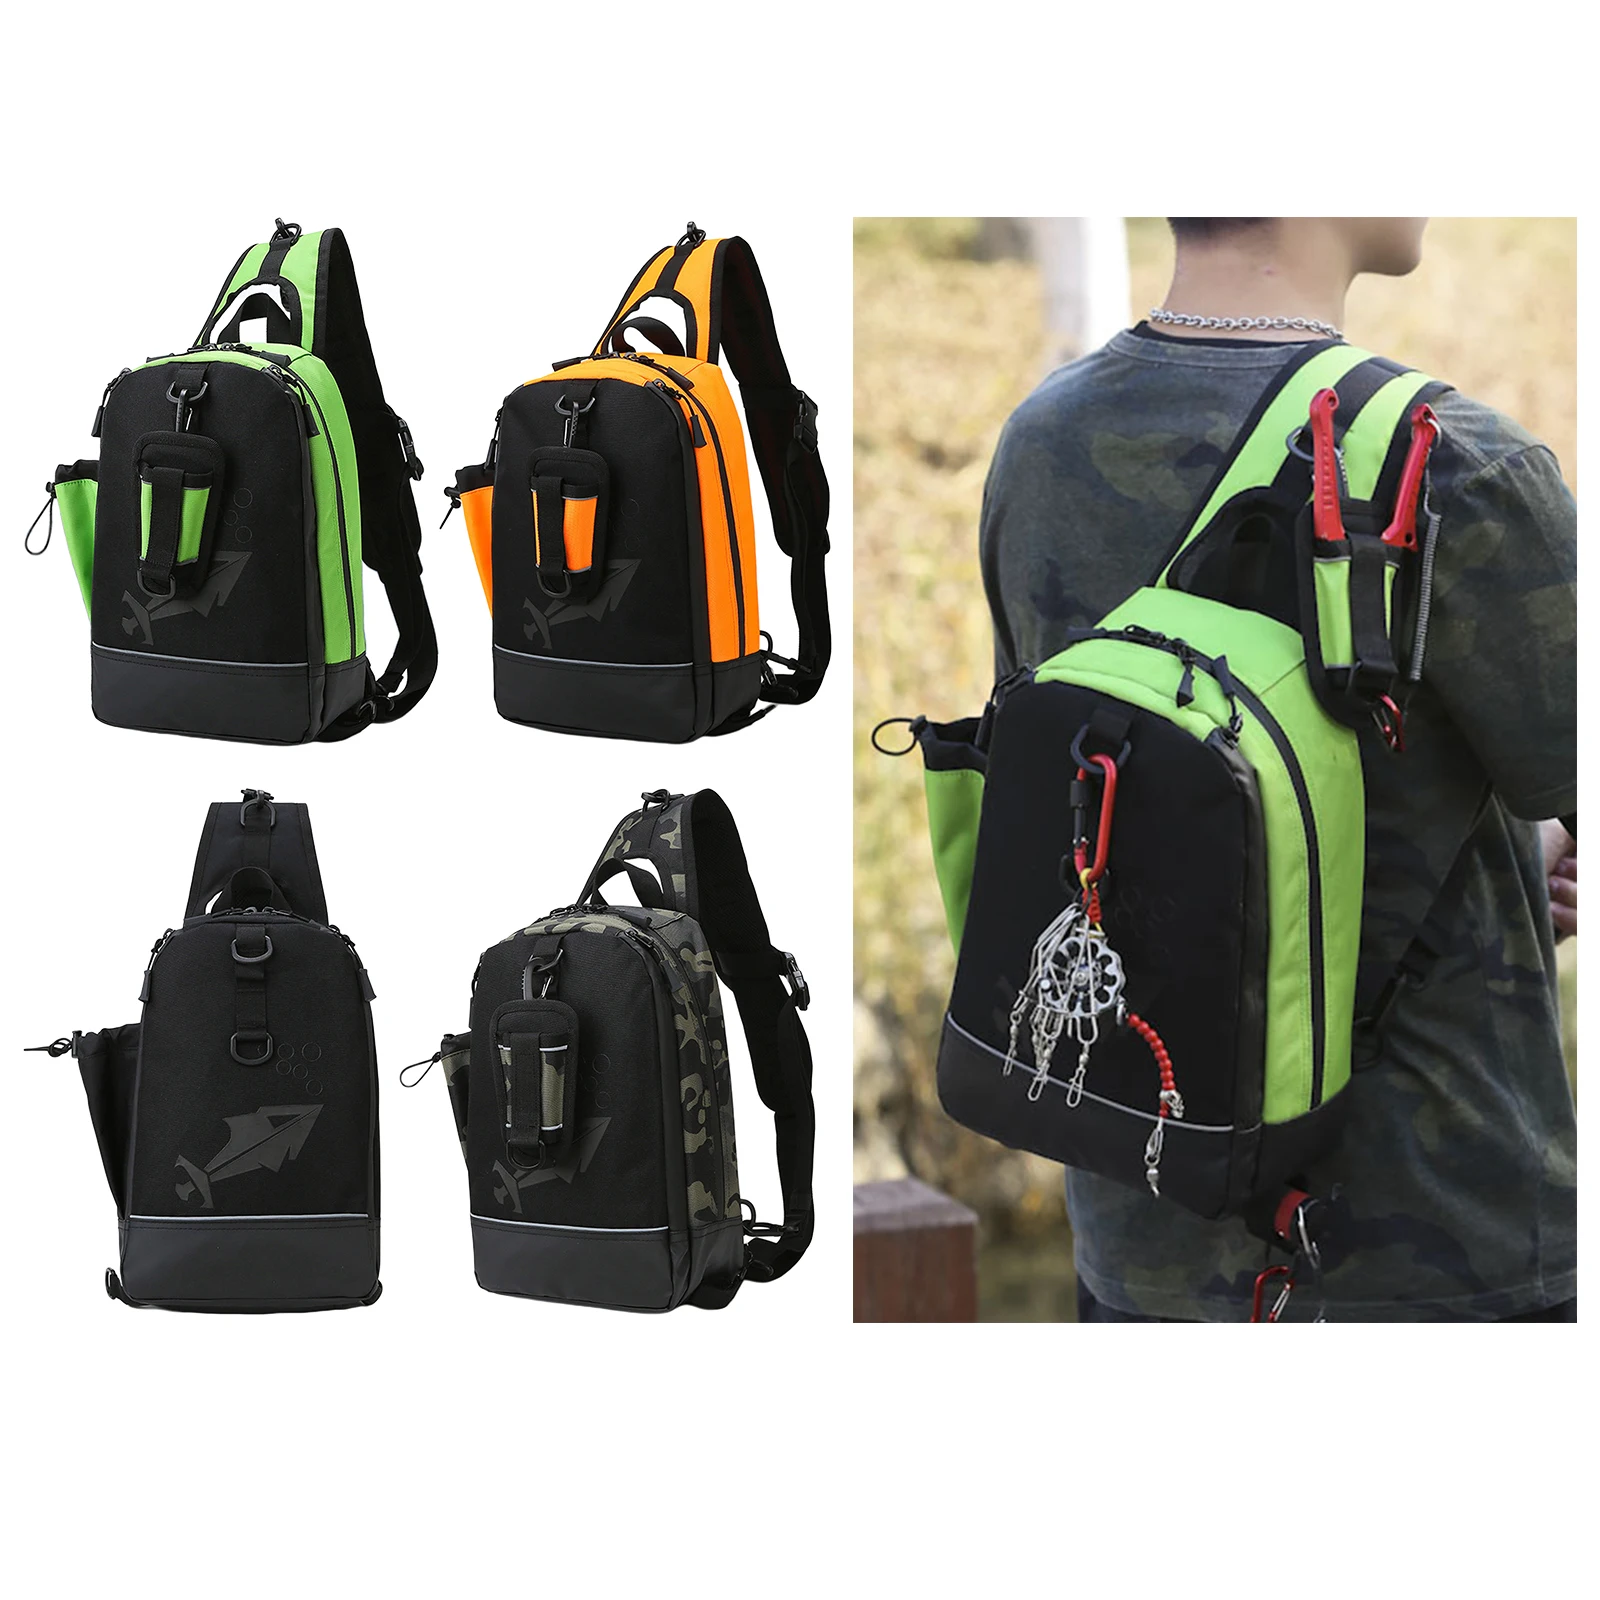 Oxford Cloth Chest Bag Hunting Fishing Bags Camping Hiking Men`s Shoulder Bag Day Pack for Travel Outdoor